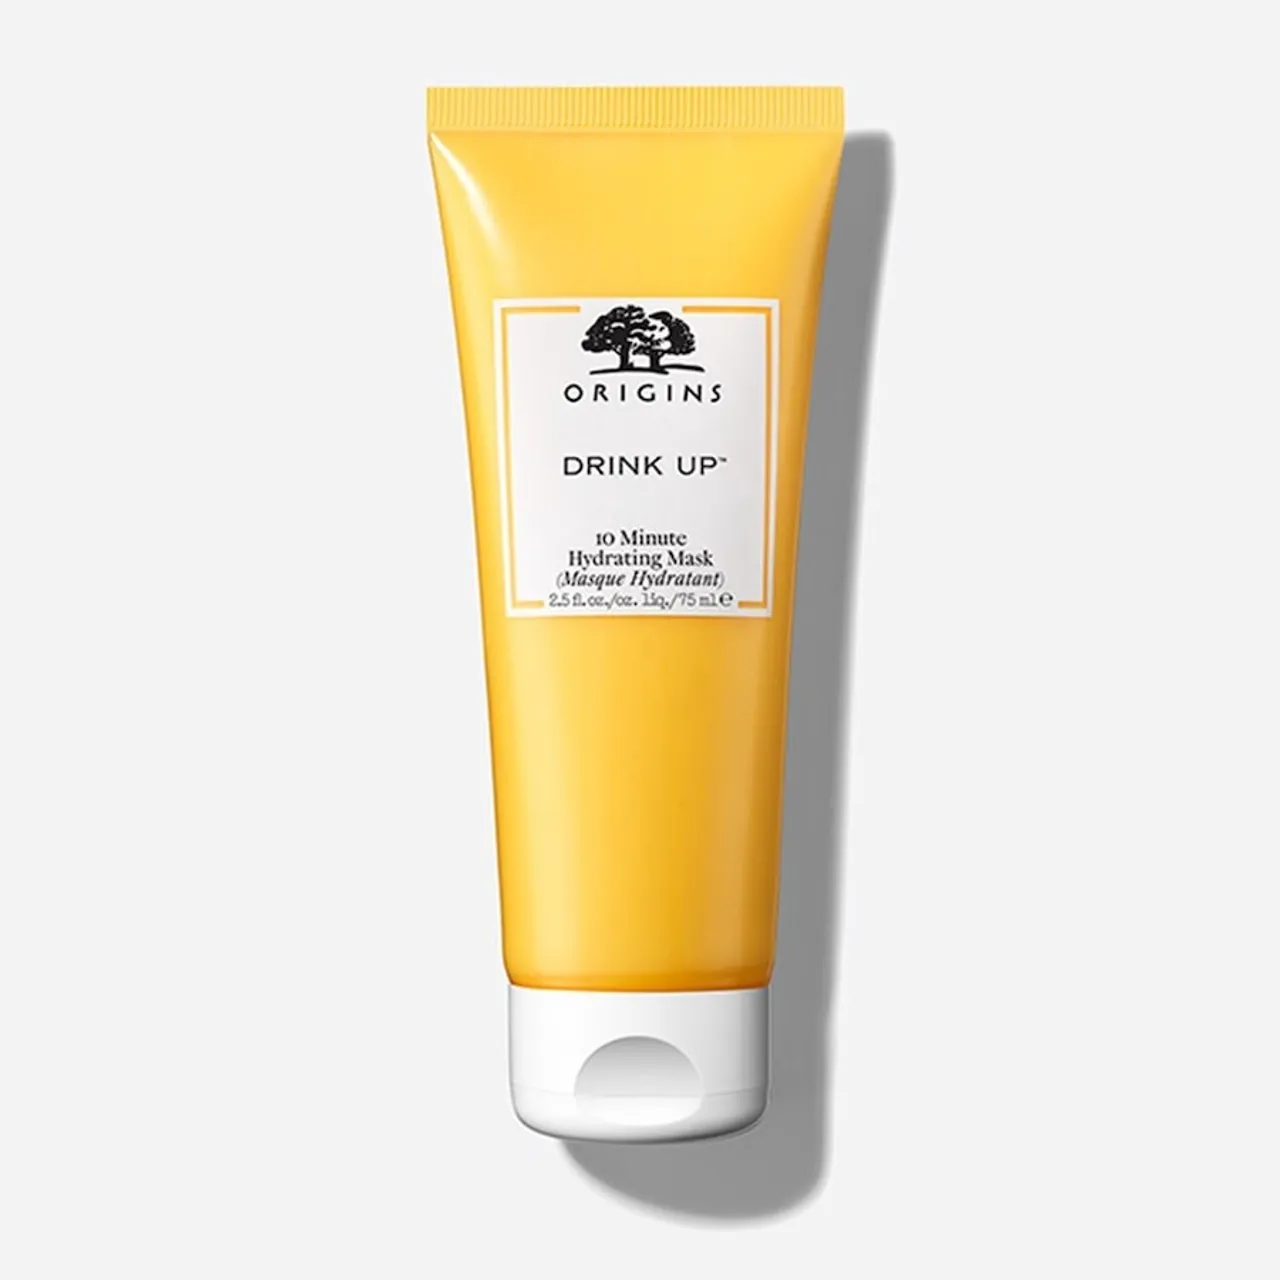 DRINK UP™ 10 Minute Hydrating Mask with Apricot